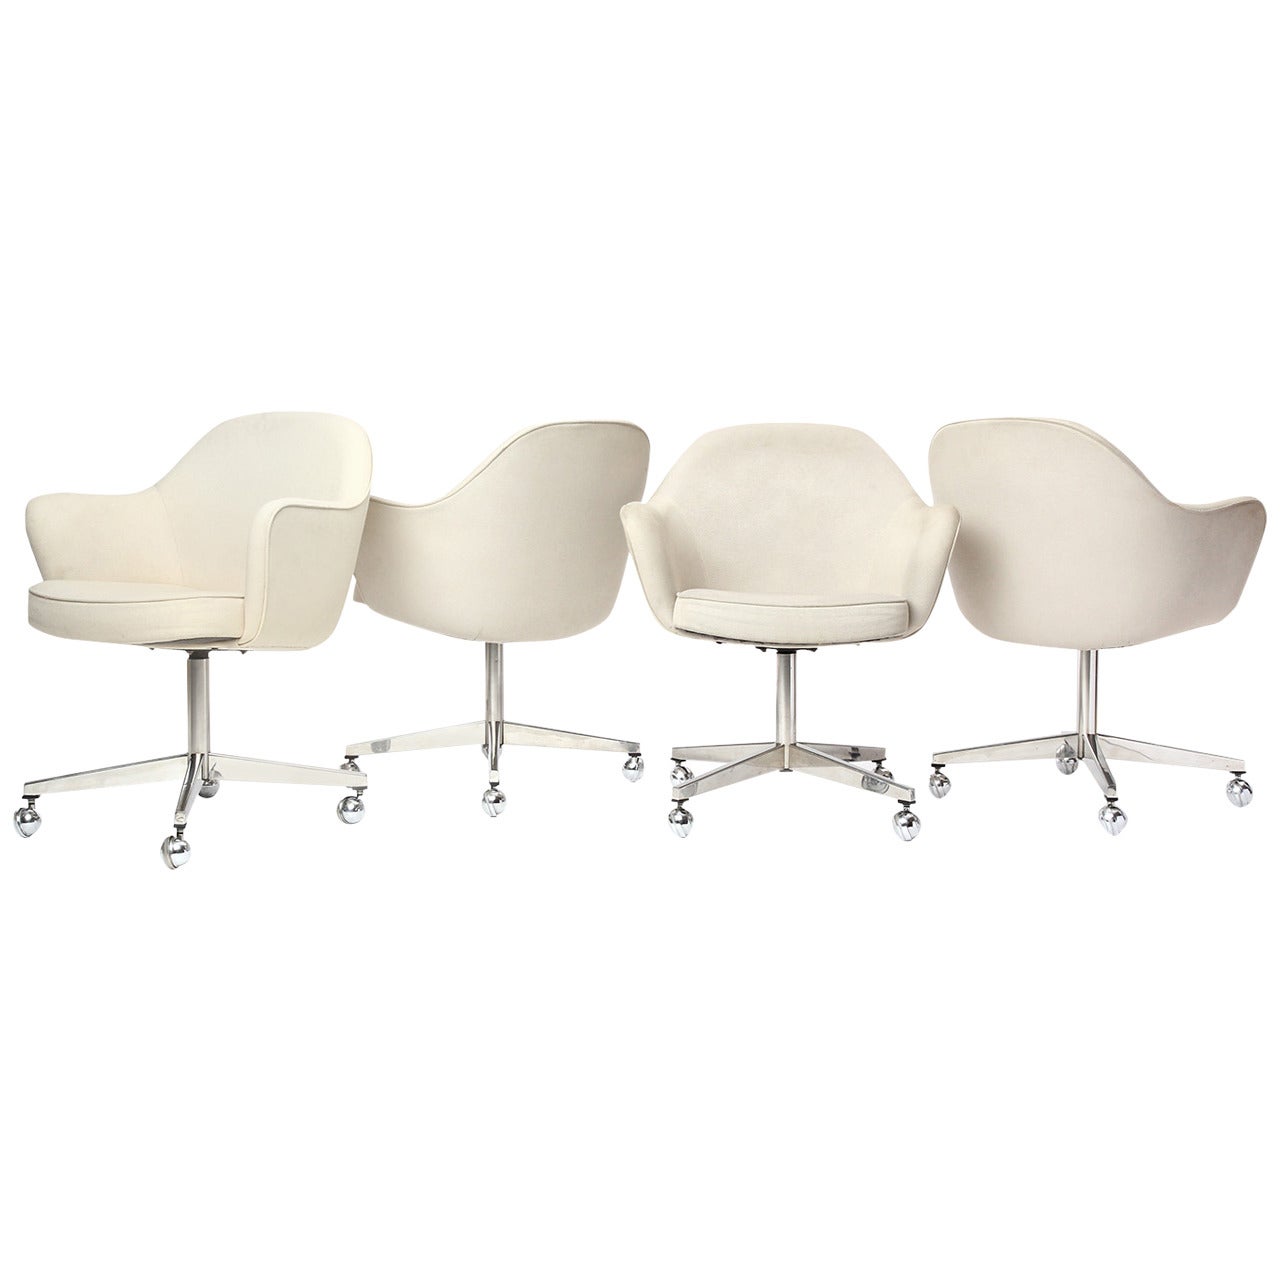 A Mid-Century Modern sculptural swiveling armchair designed by Eero Saarinen featuring a cruciform chromed steel base with casters. The seat retains its original textured wool upholstery in cream and floats atop a central column. Made by Knoll in